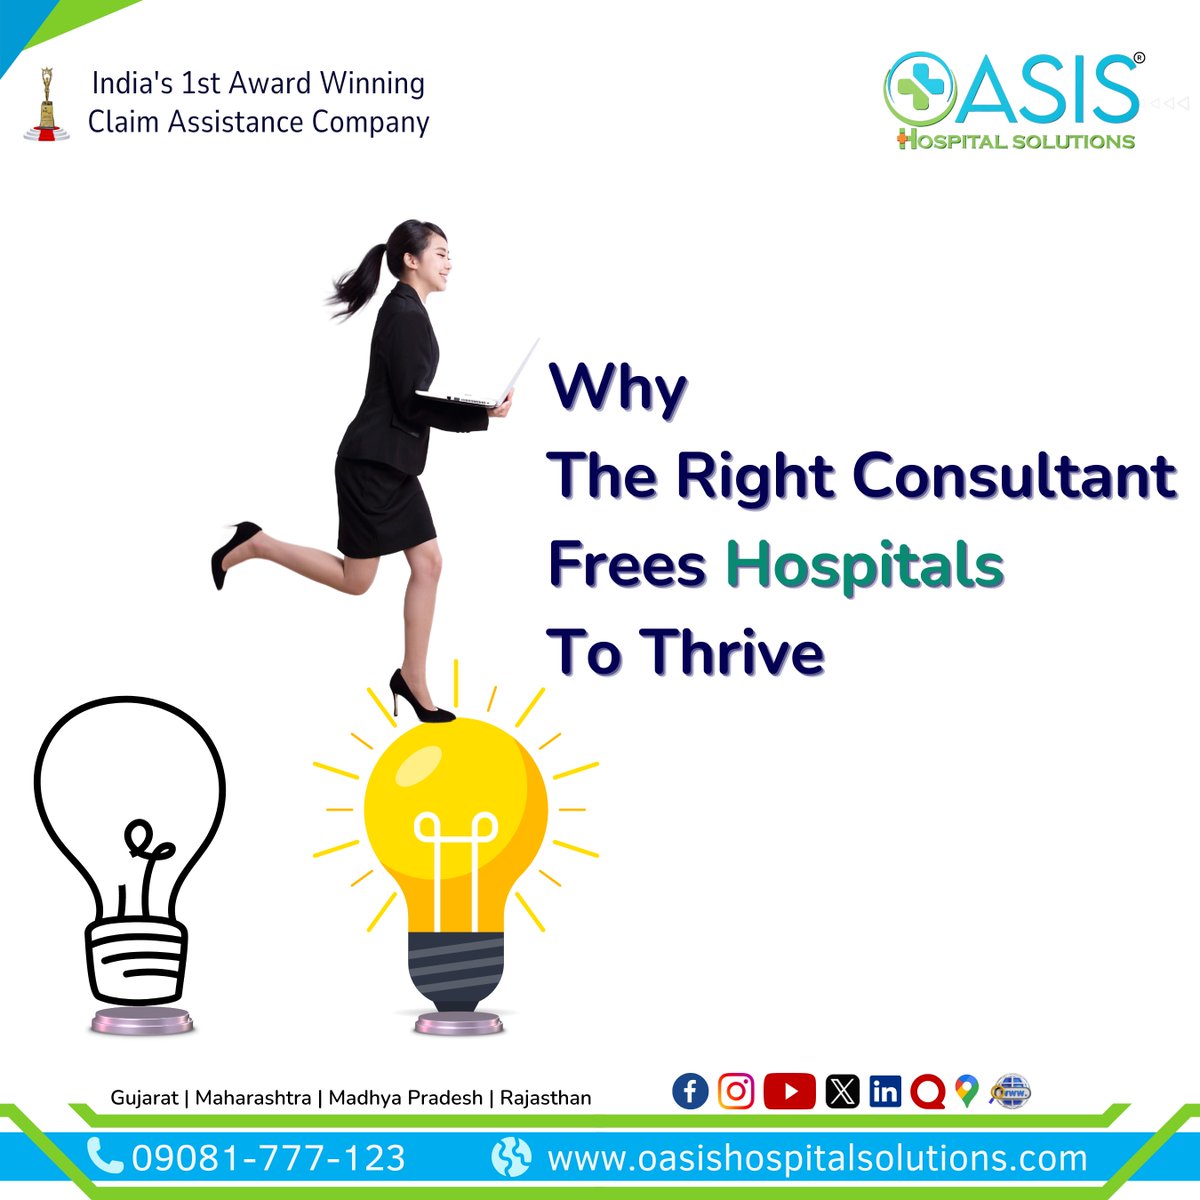 🌟 The Right Consultant Frees Hospitals to Thrive! 🌟

#nabh #tpadesk #claimmanagement
 #corporateinsurance #pmjay #esic #governmentschemes #hospitalgrowth #mbbs #OasisHospitalSolutions #AwardWinningClaims #cashlesseverywhere #cashlessanywhere #cashlessclaims #cashlessmedicaim